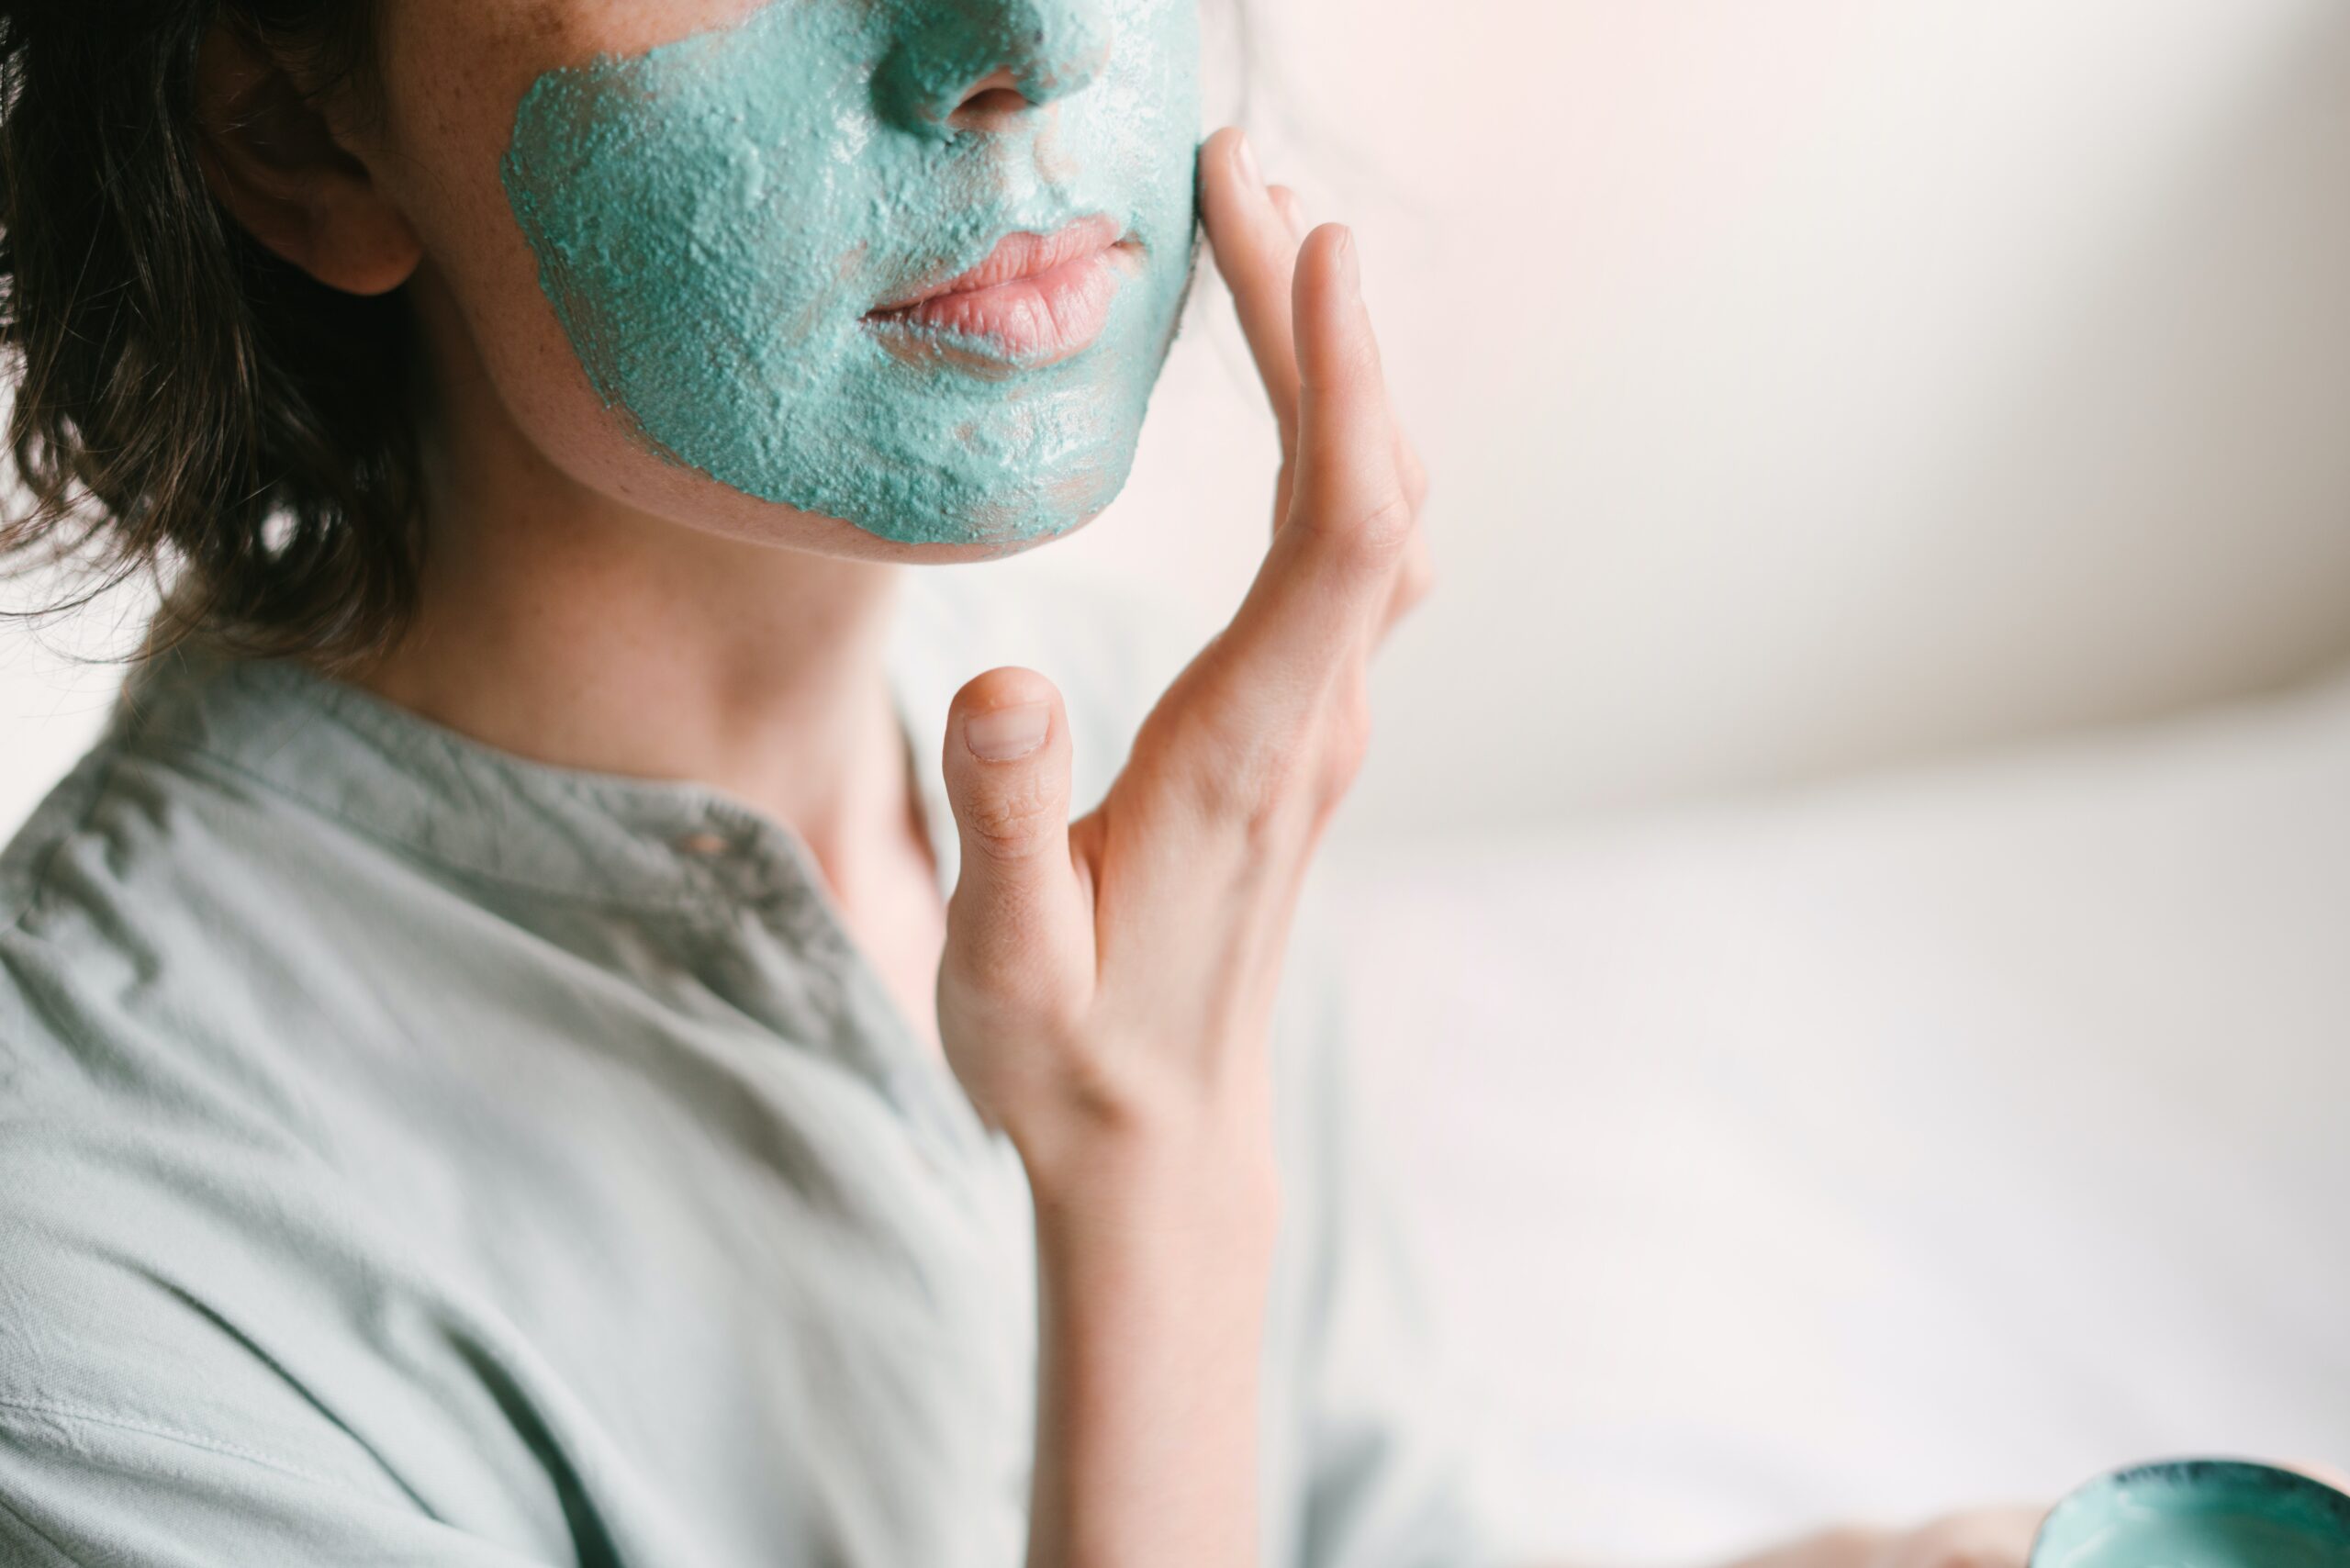 How To Deal With Skin Impurities Effectively